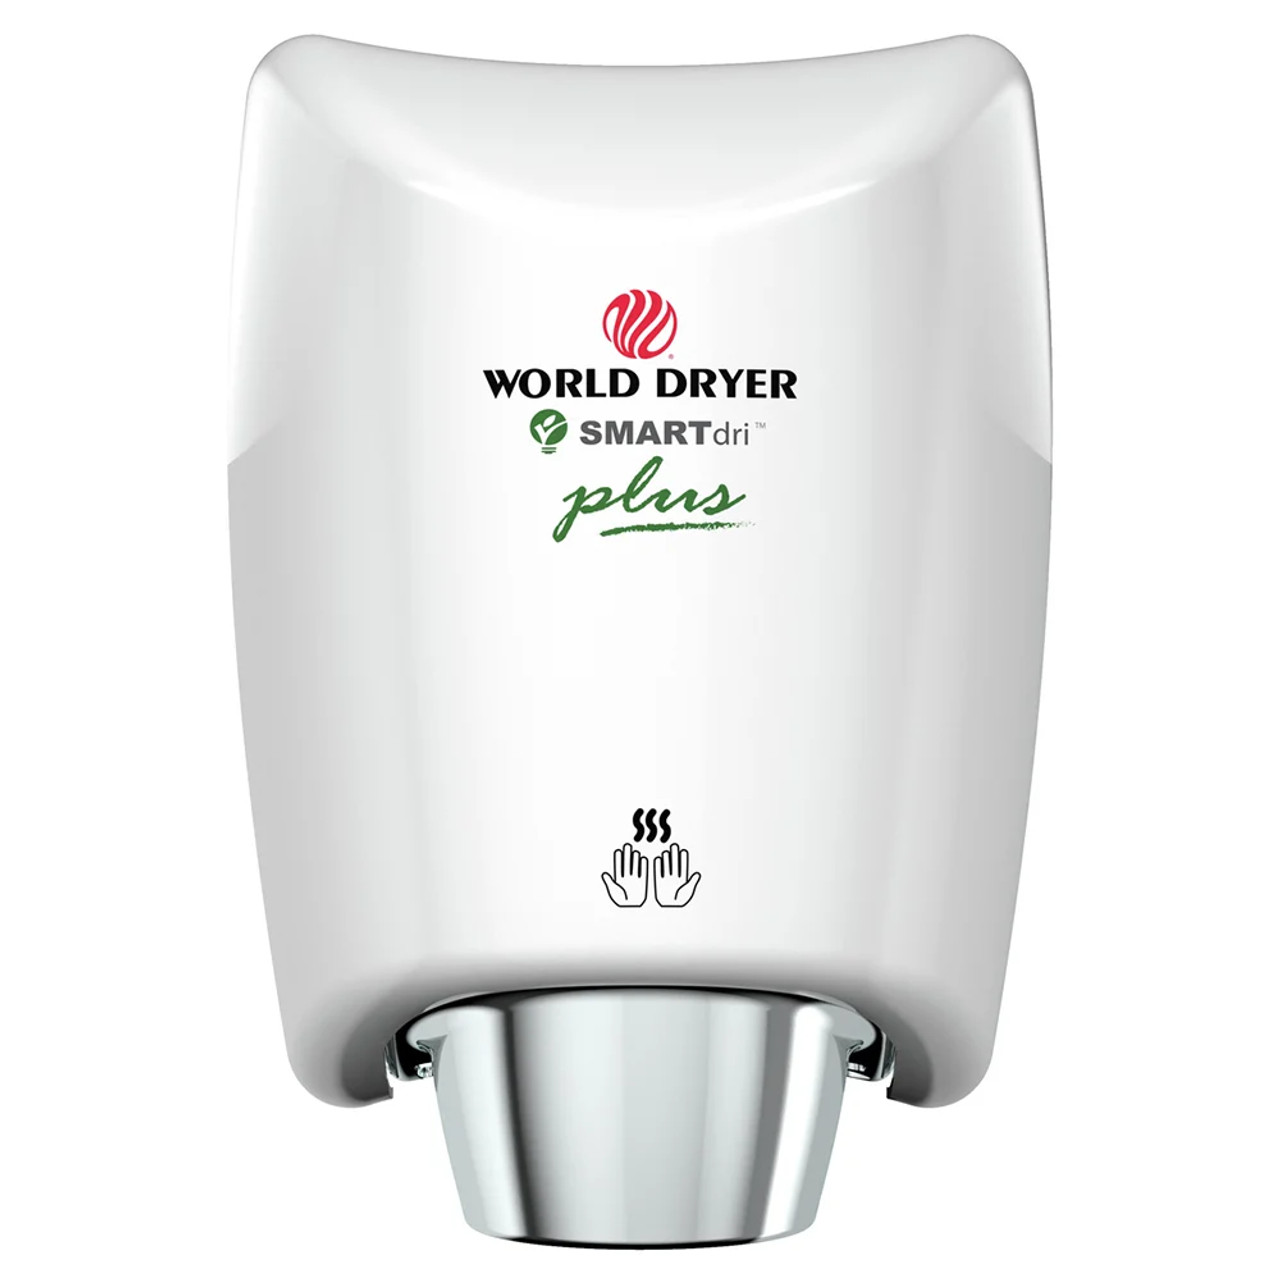 World Dryer Automatic Hand Dryer - 10 Second Dry Time, White Aluminum, 120V